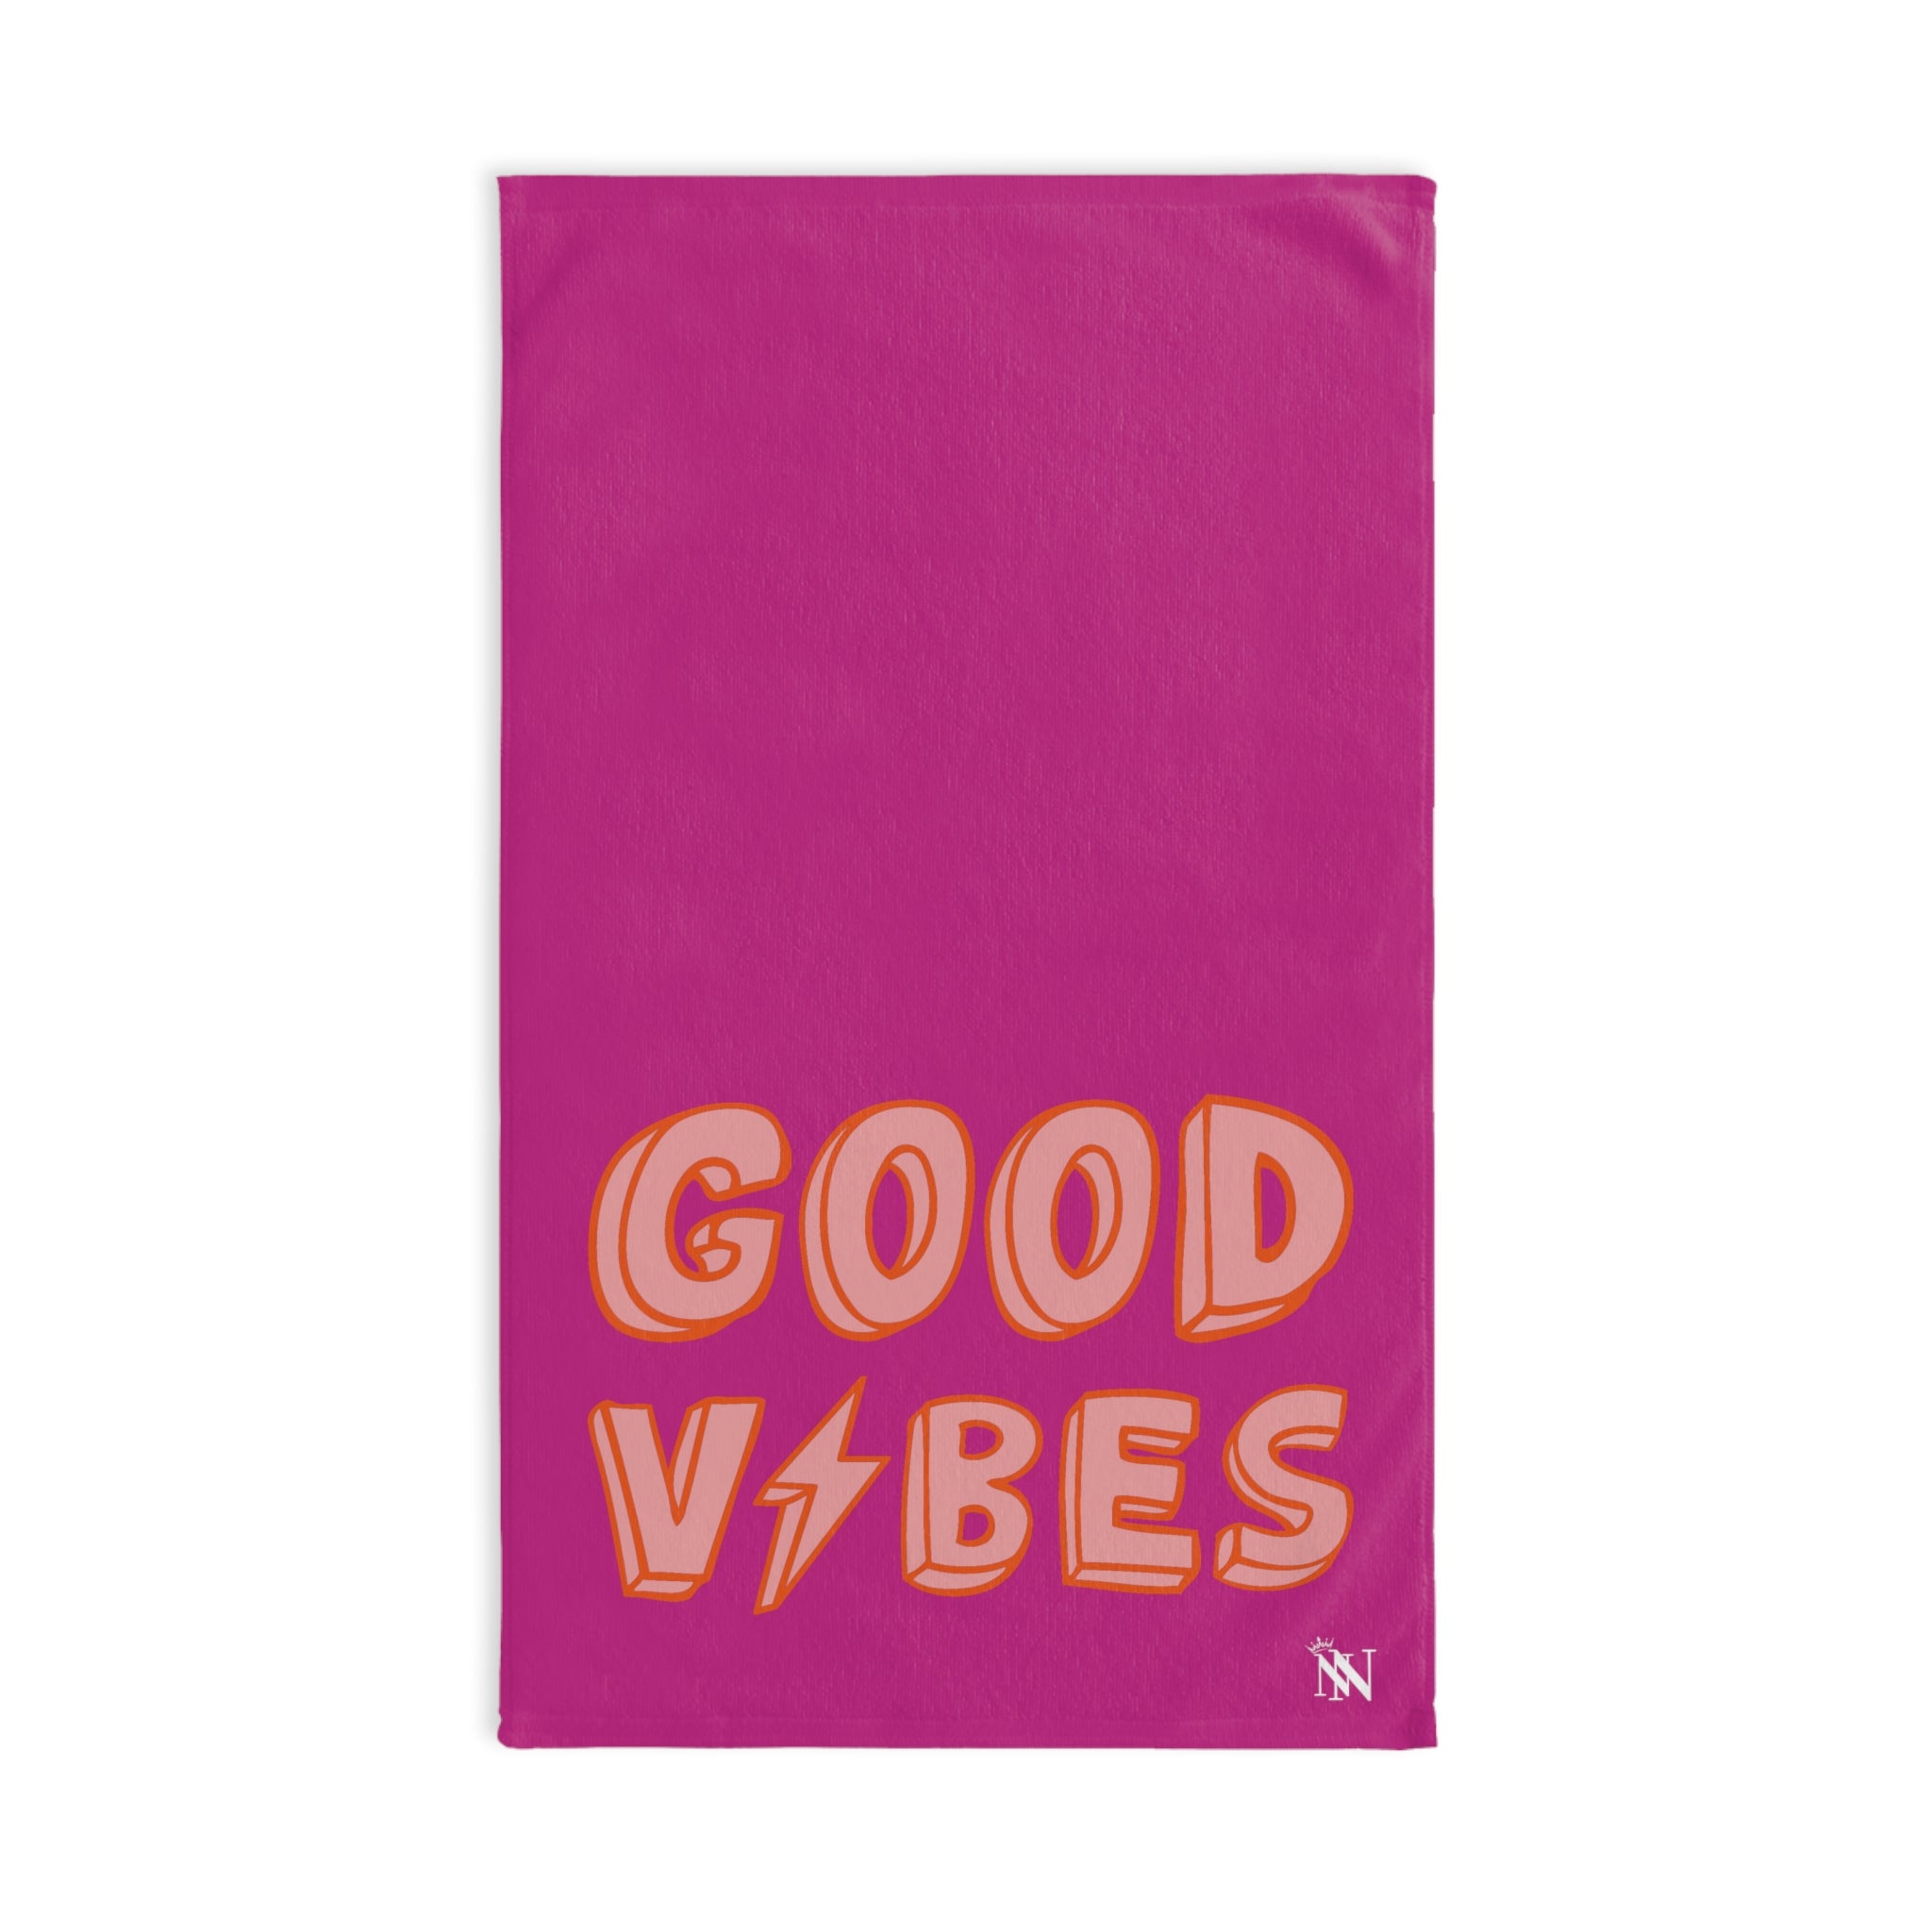 Electric Vibe Good Fuscia | Funny Gifts for Men - Gifts for Him - Birthday Gifts for Men, Him, Husband, Boyfriend, New Couple Gifts, Fathers & Valentines Day Gifts, Hand Towels NECTAR NAPKINS